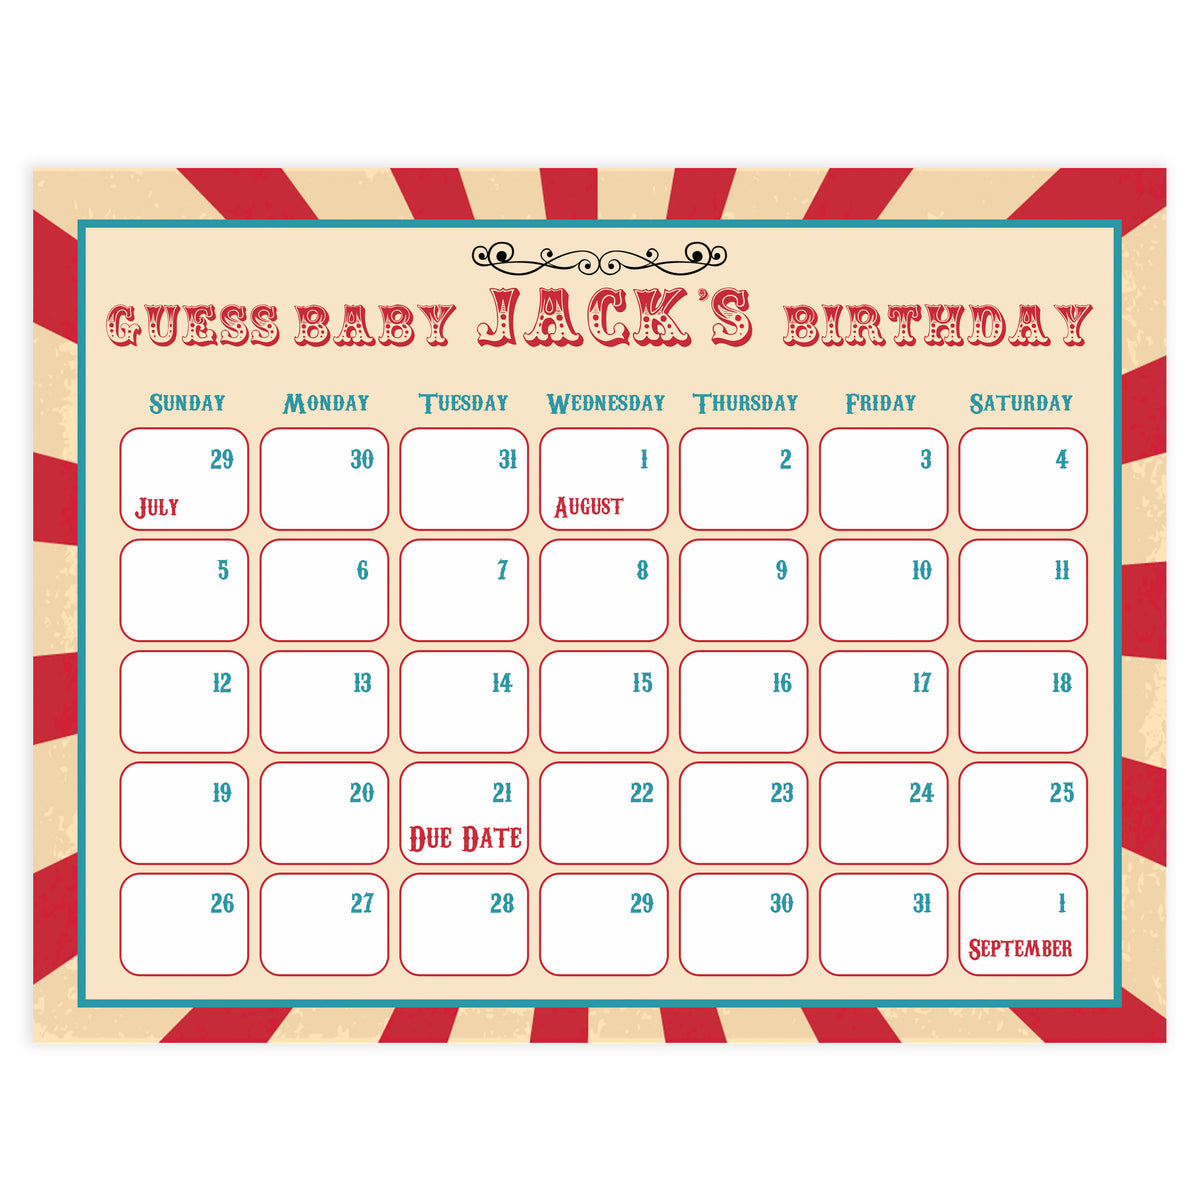 guess the baby birthday game, baby birthday predictions game, circus baby shower games, carnival fun baby shower games